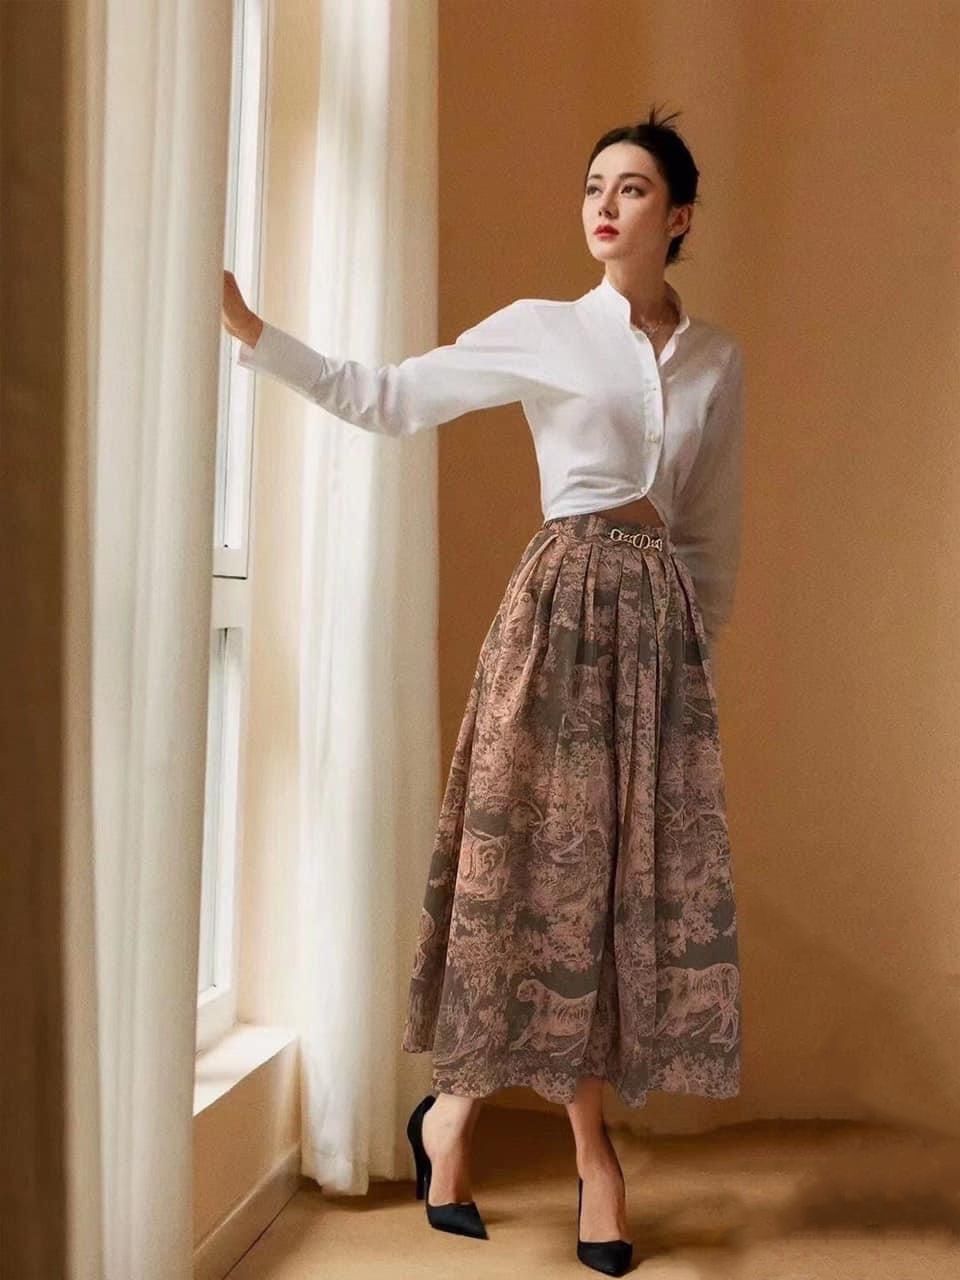 VÁY DIORIVIERA FLARED SKIRT GRAY AND PINK COTTON MUSLIN WITH TOILE DE JOUY REVERSE MOTIF 2